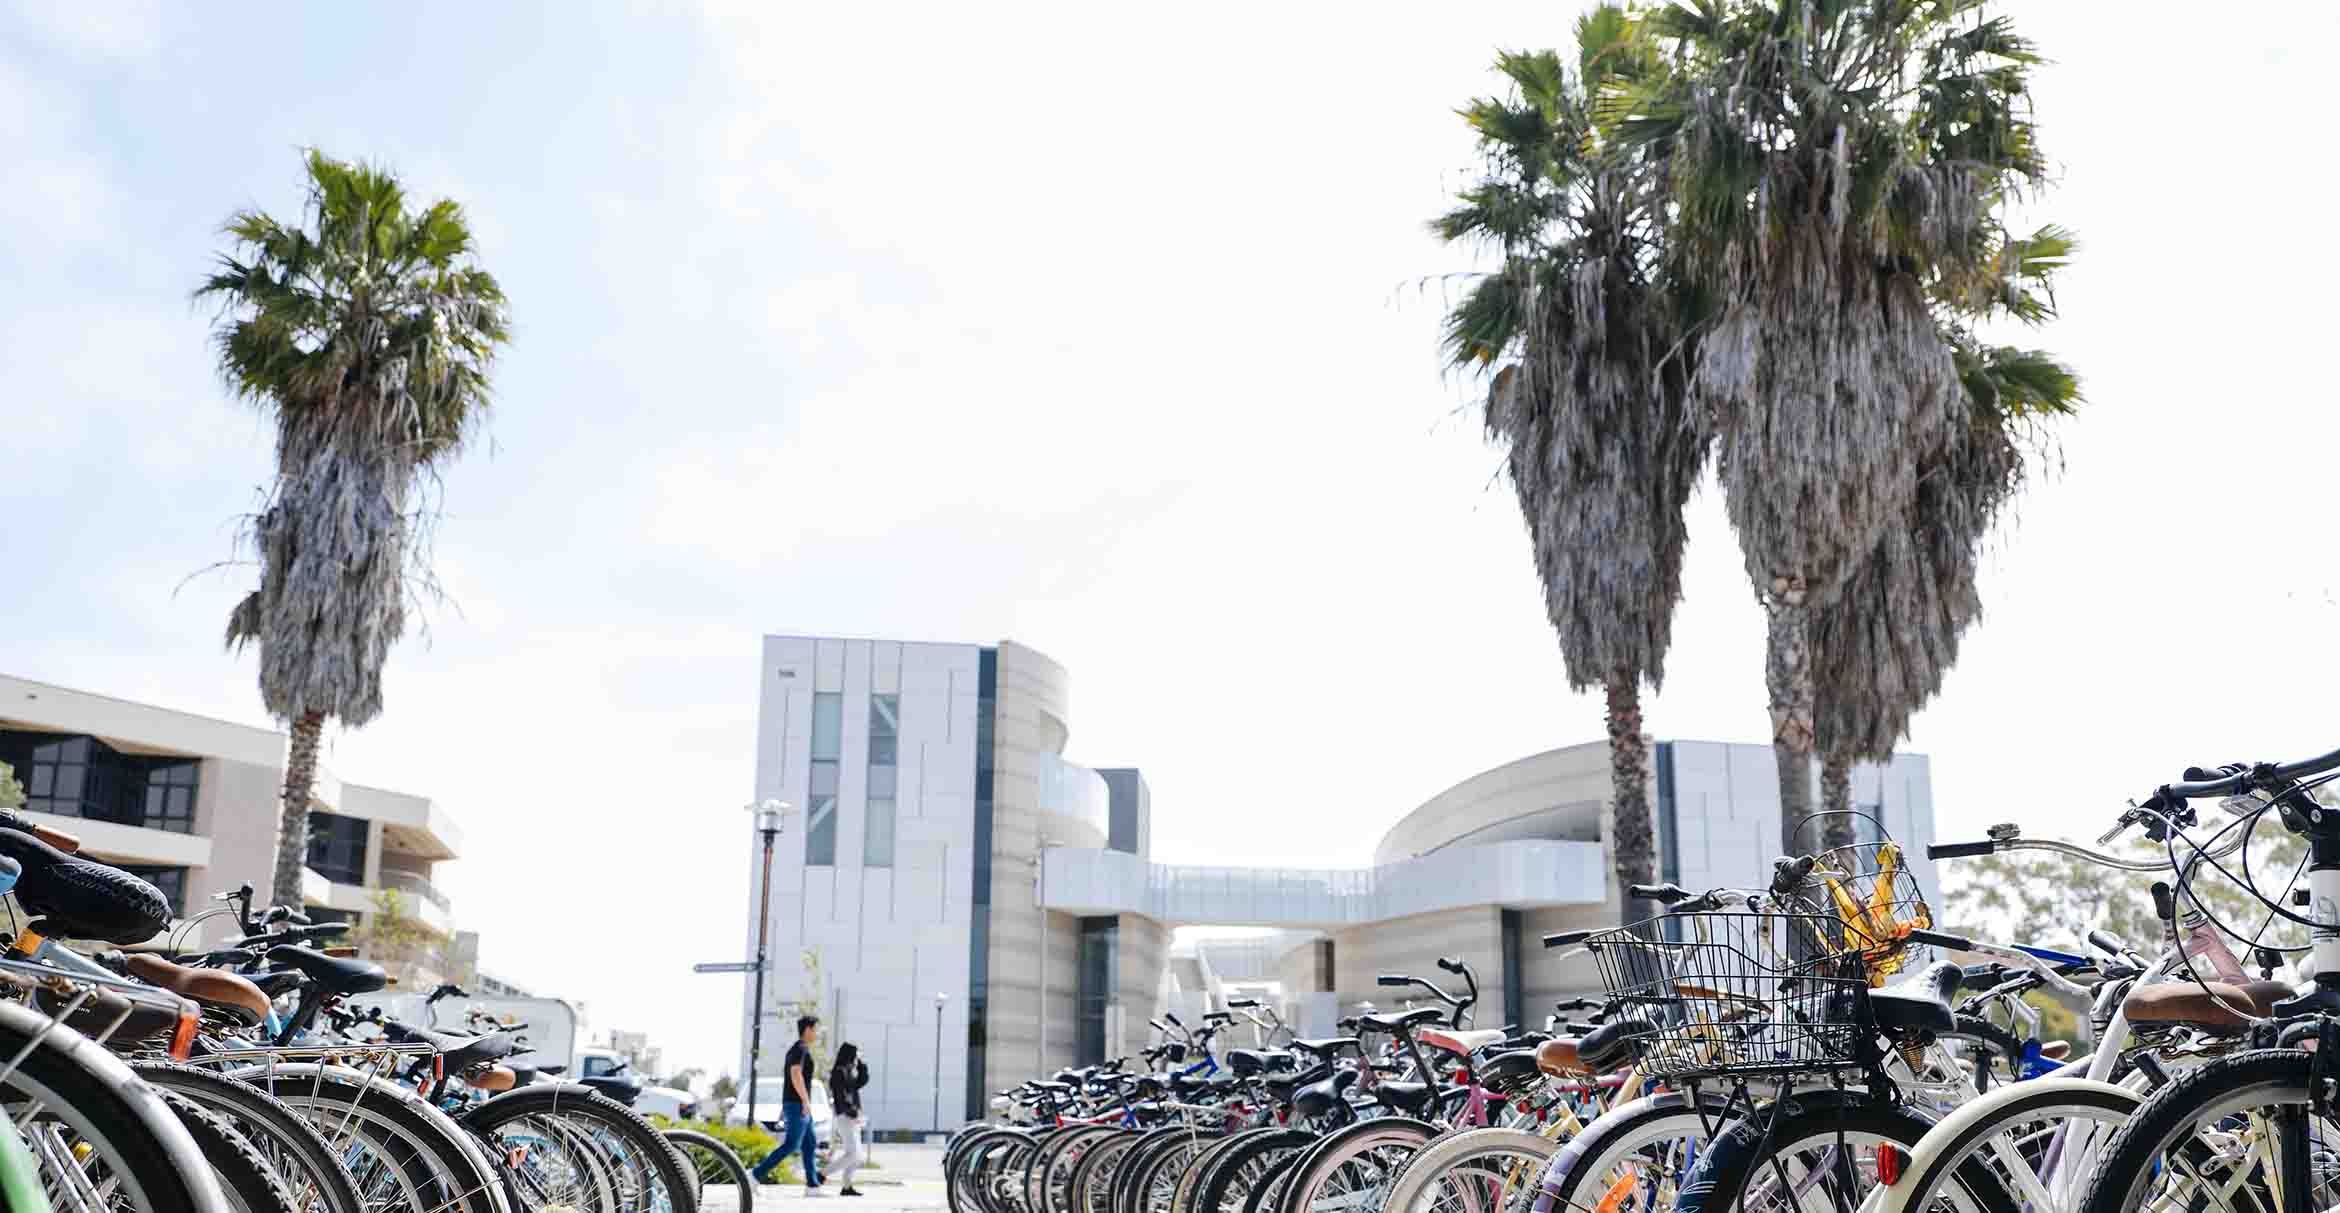 Rows of bikes are seen in the foreground, with palm trees and a modern building in the back